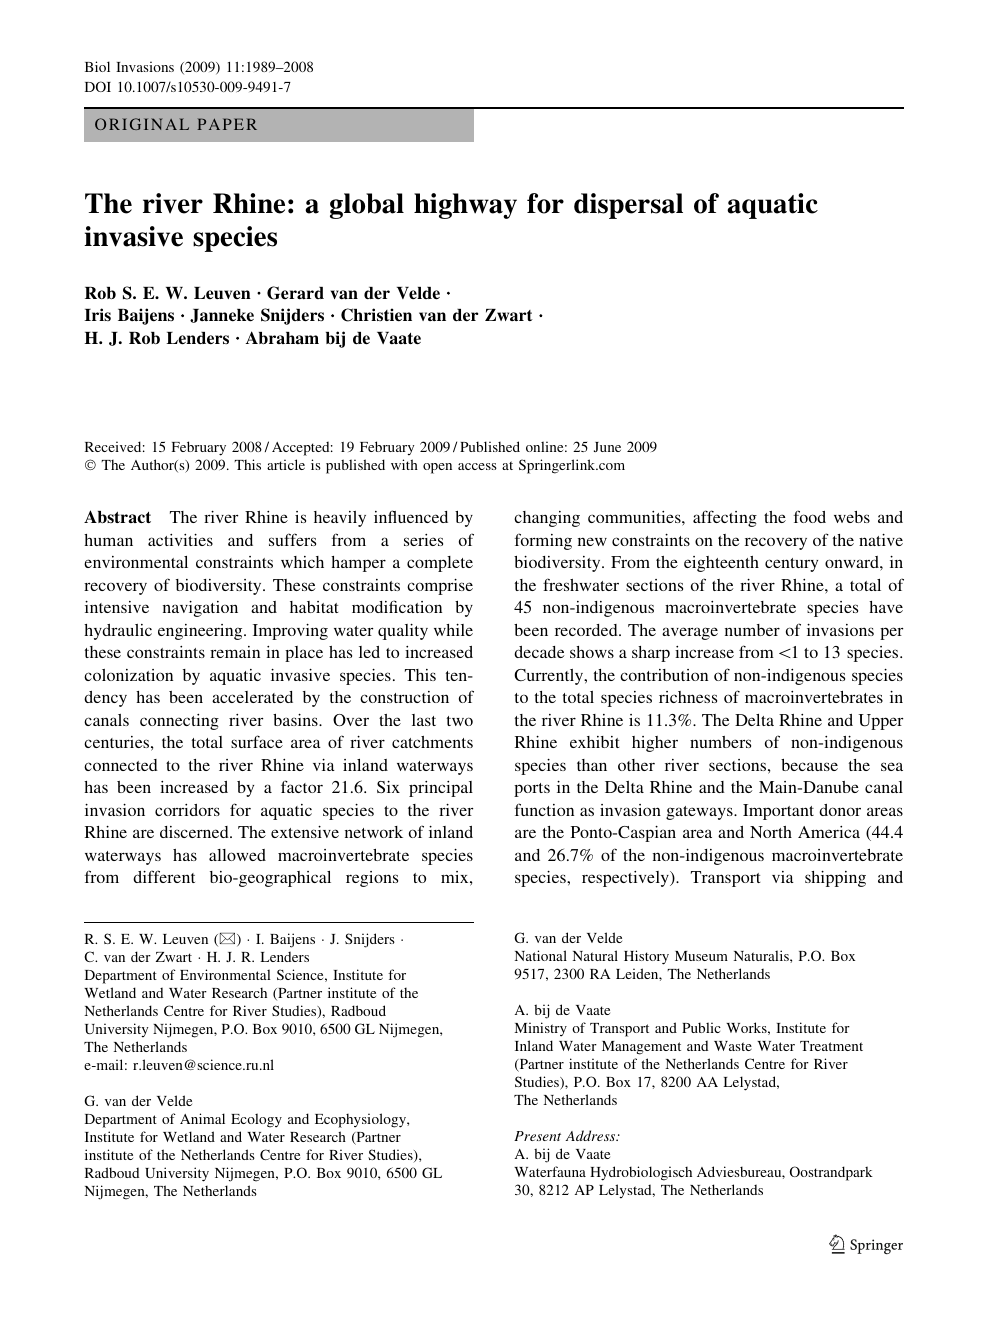 The River Rhine A Global Highway For Dispersal Of Aquatic Invasive Species Topic Of Research Paper In Biological Sciences Download Scholarly Article Pdf And Read For Free On Cyberleninka Open Science